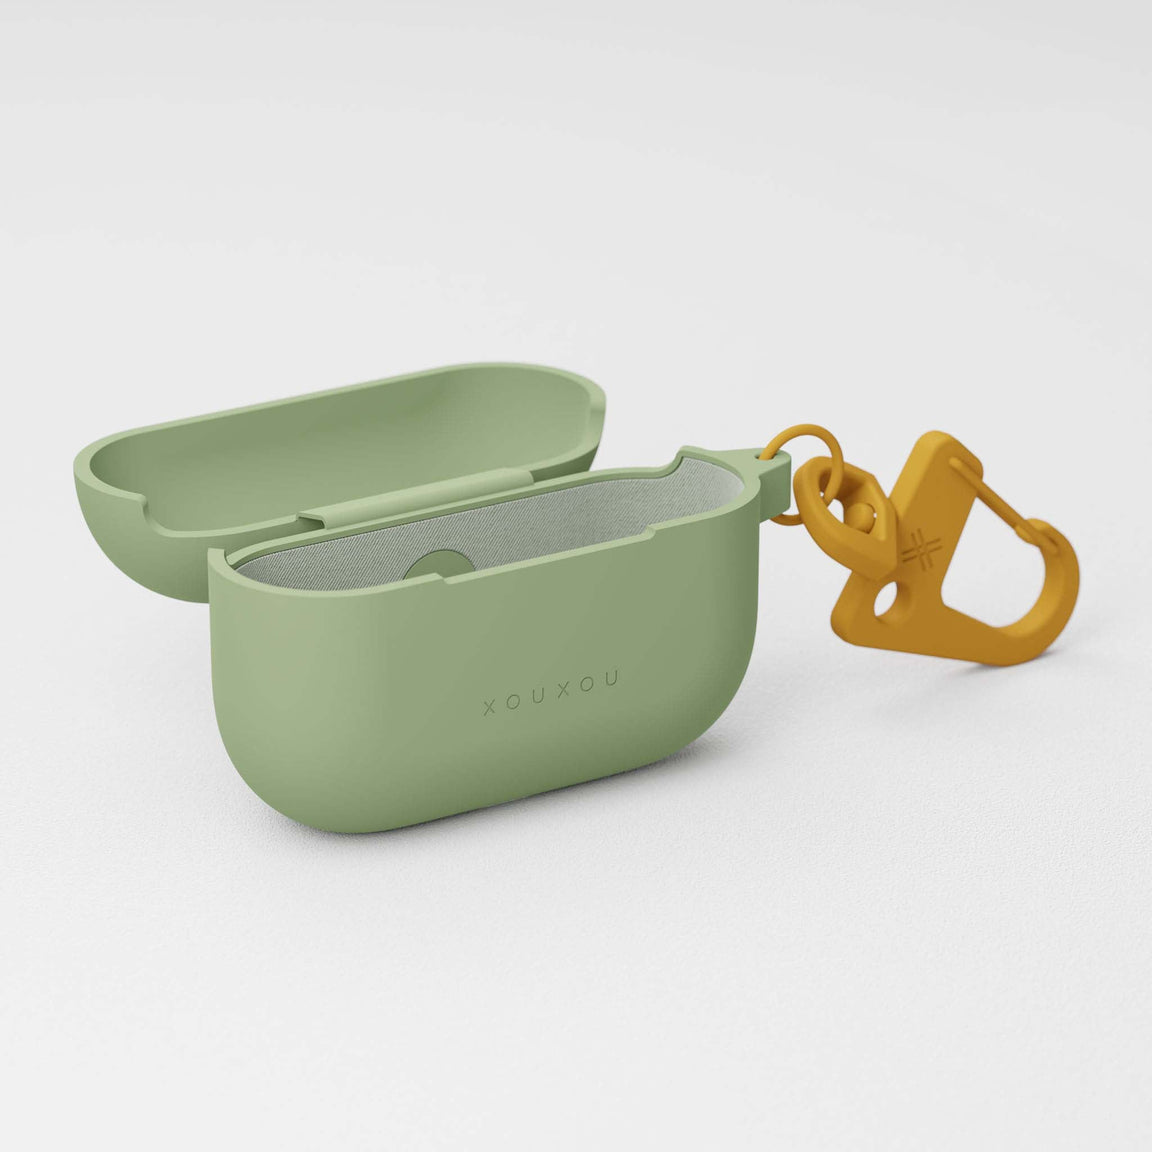 Apple AirPods Pro case in Olive Green silicone with carabiner | XOUXOU